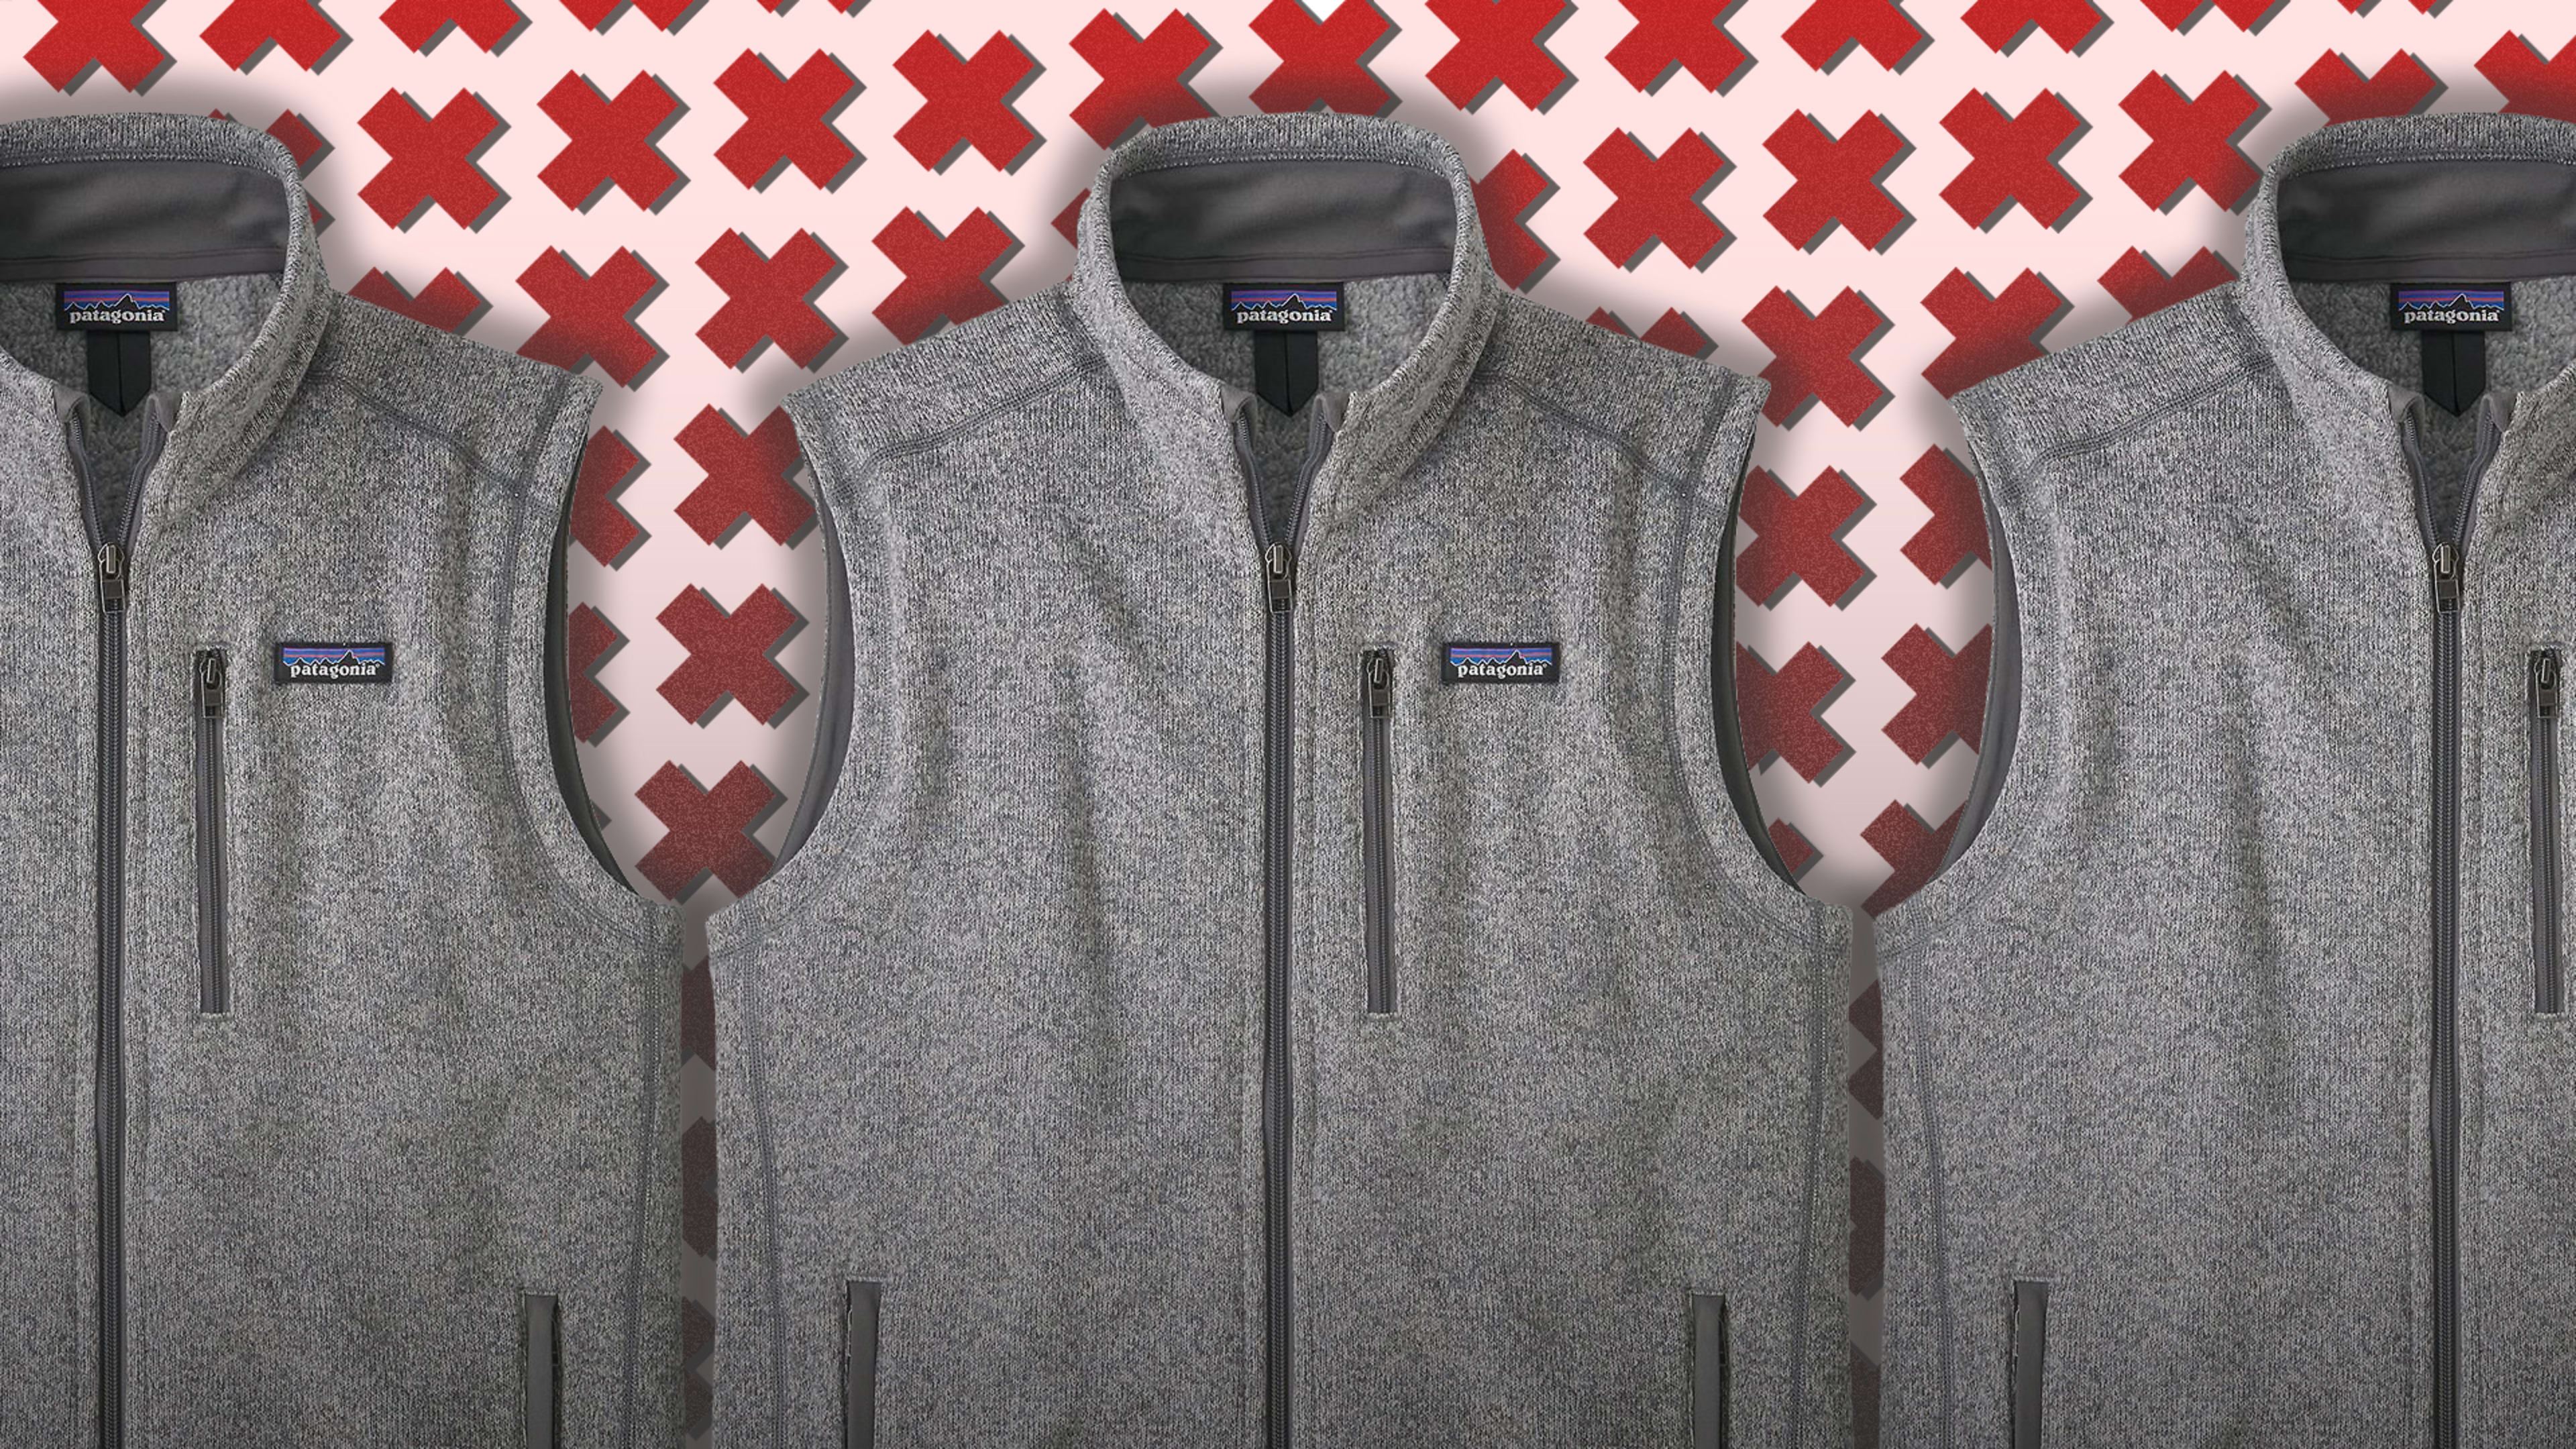 Pour one out for the tech bro uniform: Patagonia ditches corporate logos on its vests